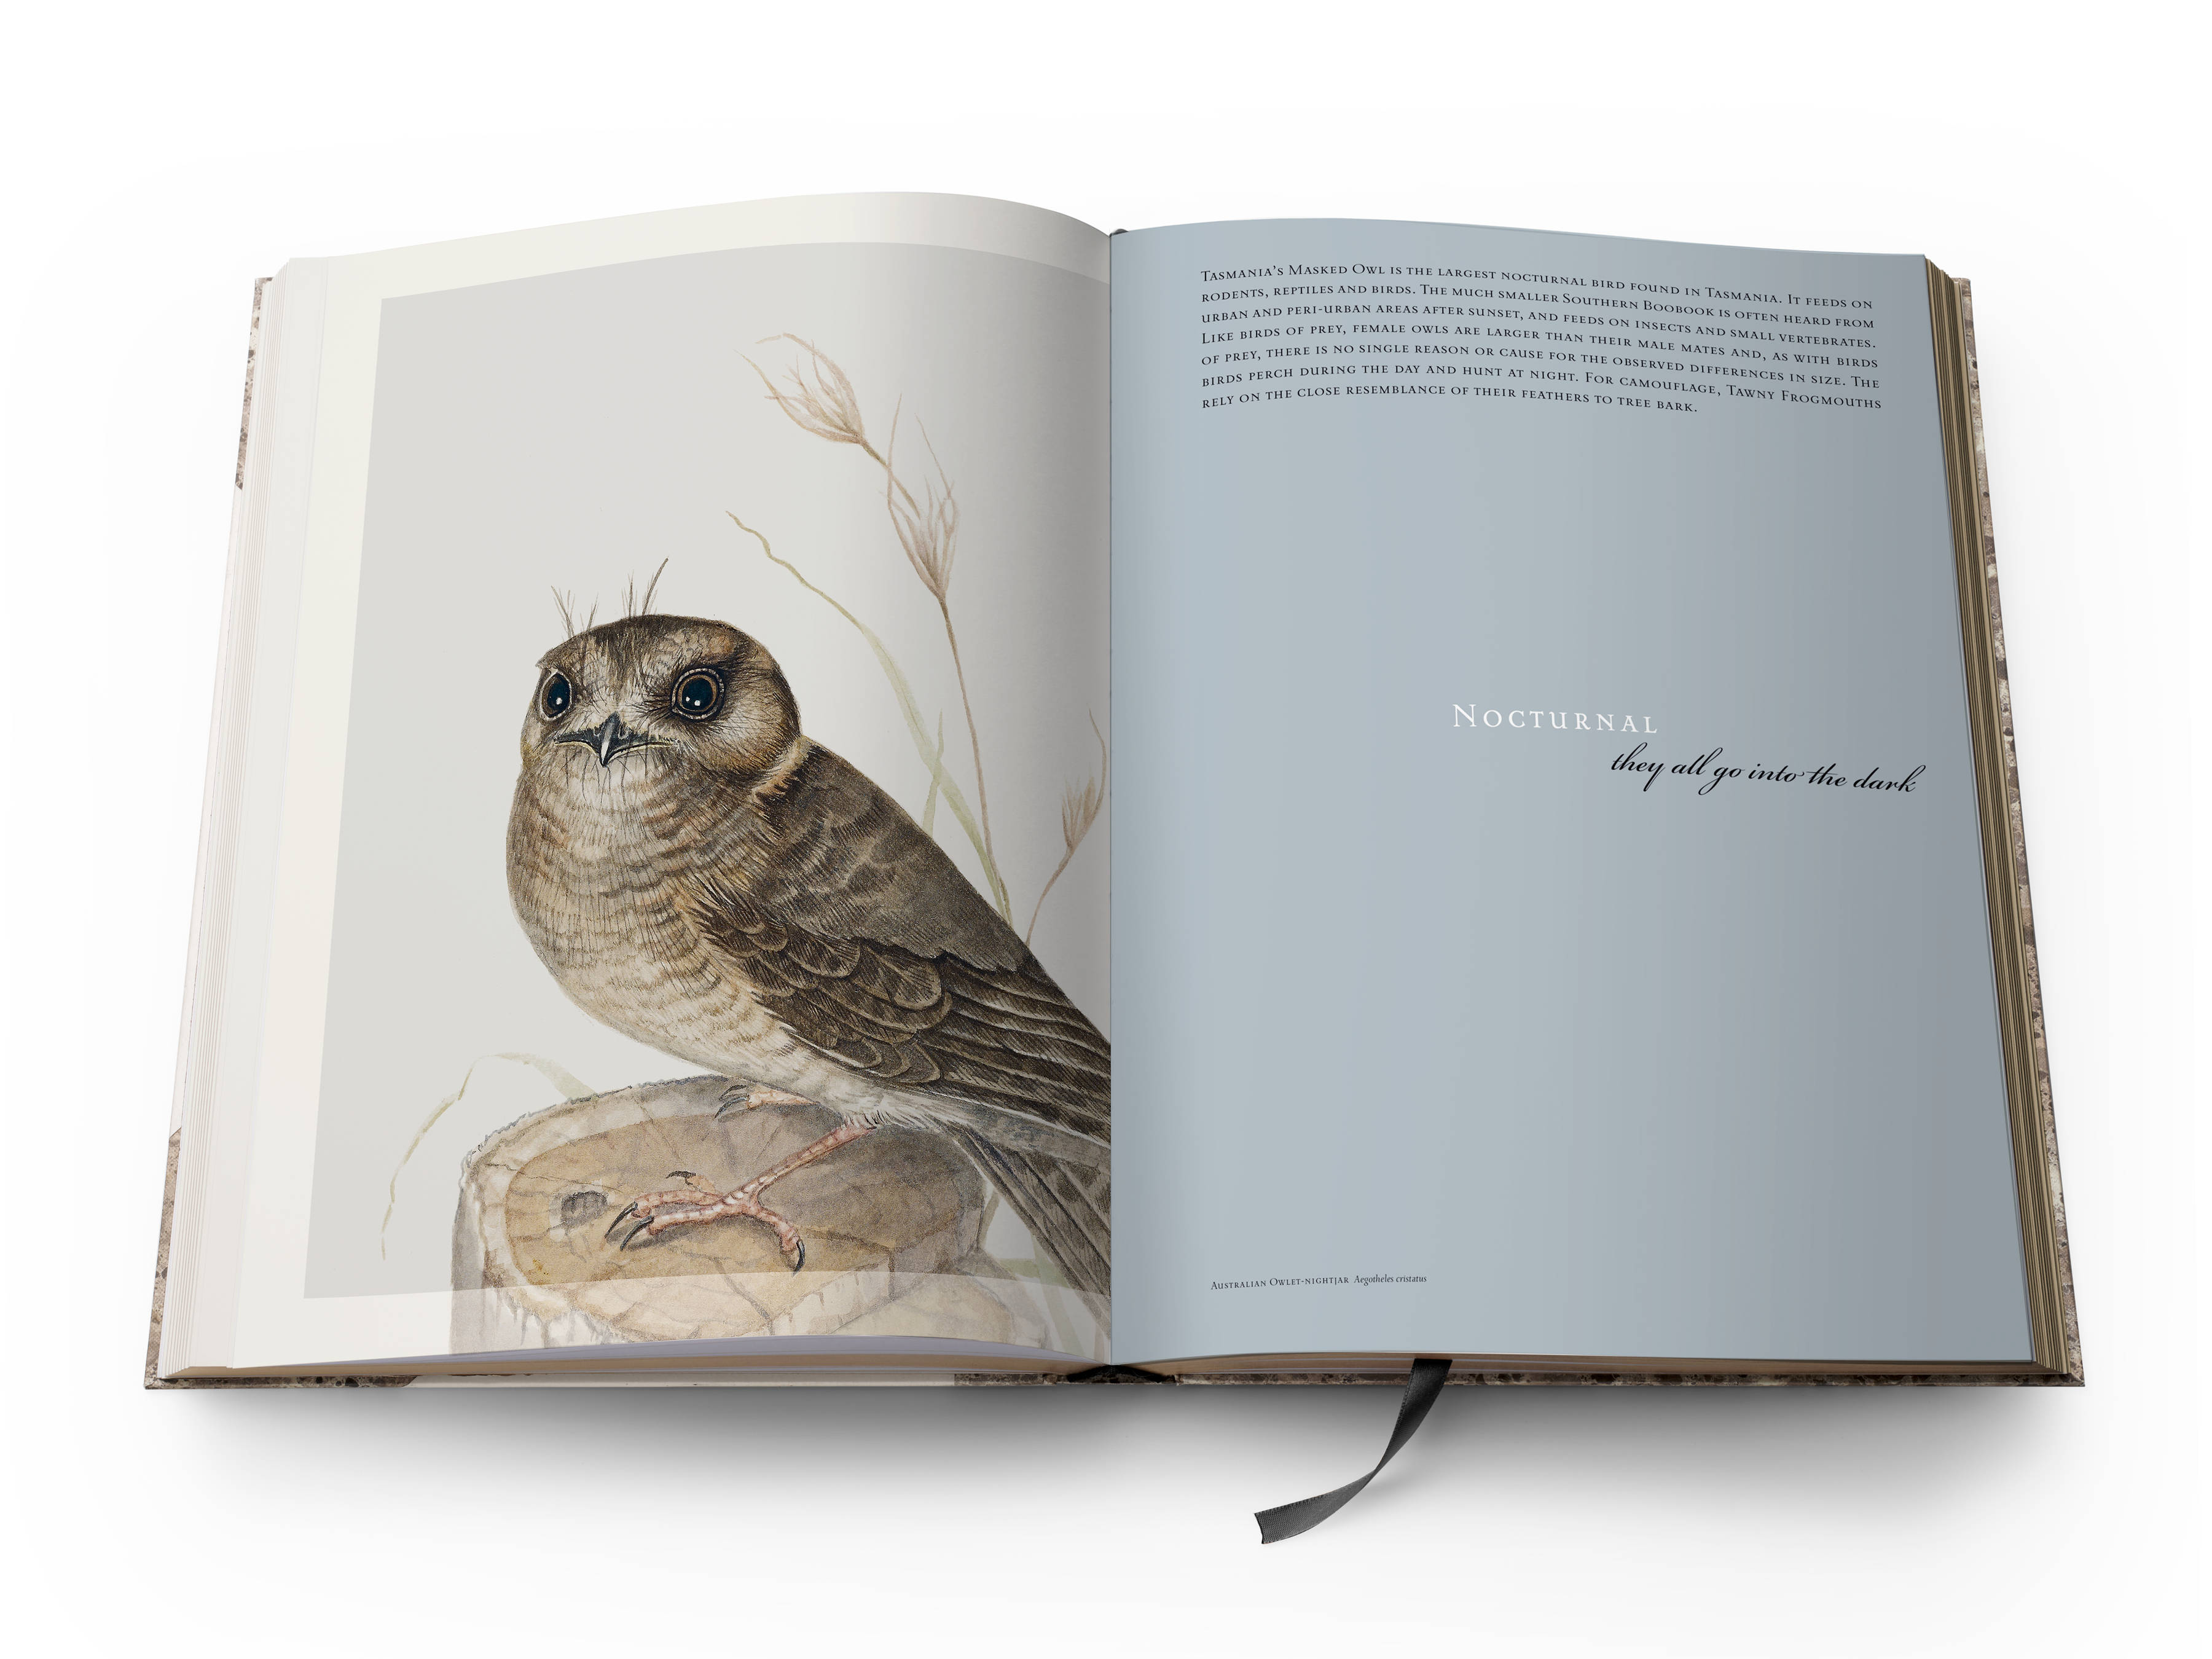 A double page spread from the book with a full-page colour plate of a Australian Owlet ‘Aegotheles cristatus’ on the left and the title of the section Nocturnal, ‘They all go into the dark’ on the right.